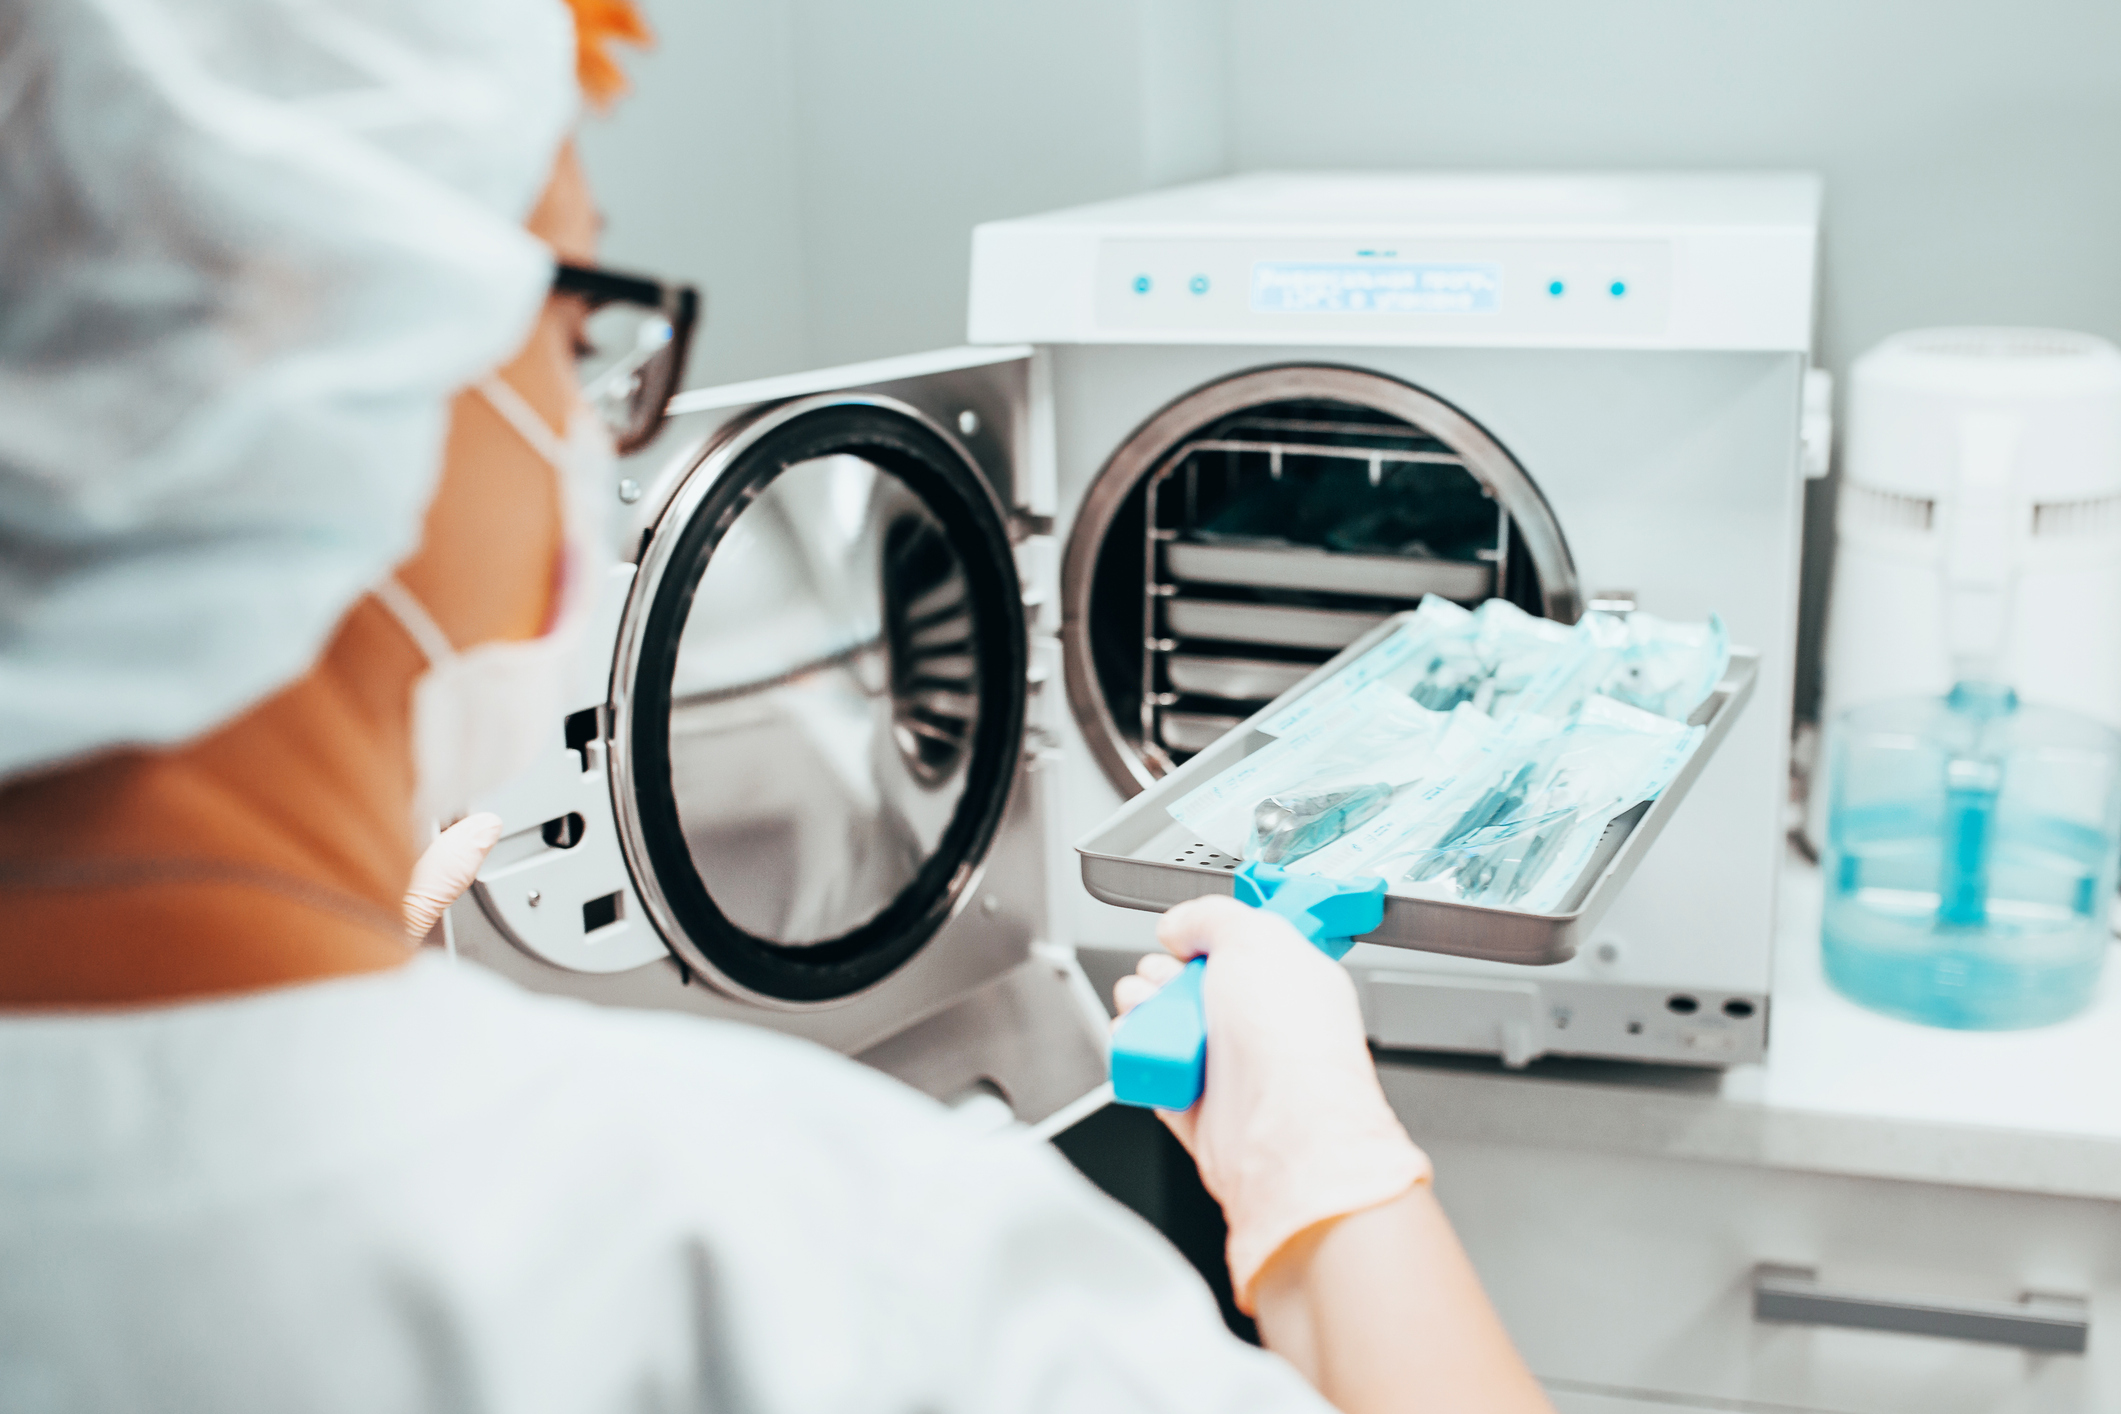 Ethylene Oxide Sterilization for Medical Devices: What Manufacturers Need to Know About Recent Events and Regulations